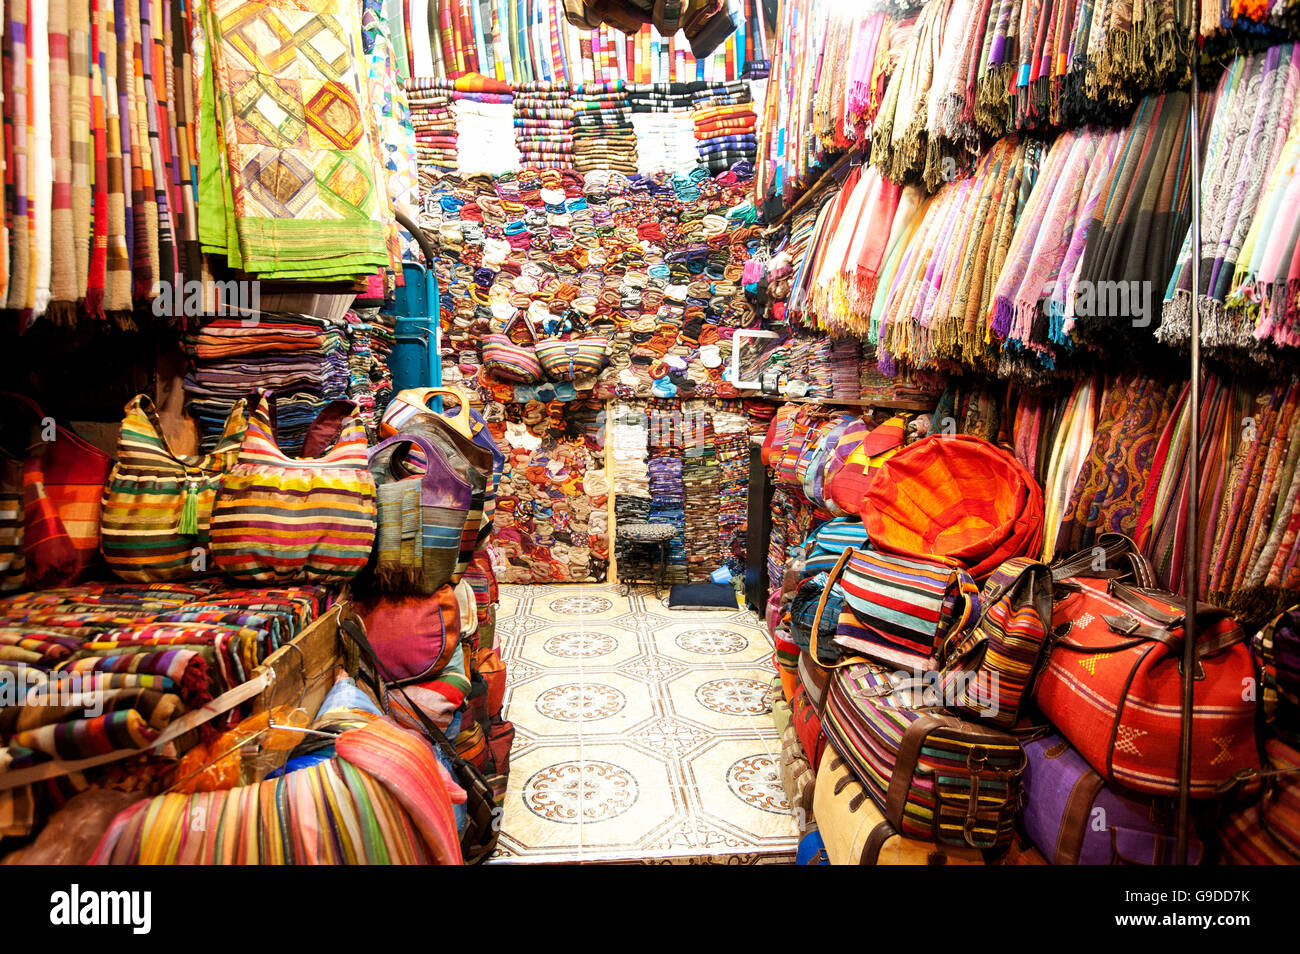 Bag and blanket shop in the souks or markets, Marrakech, Morocco, North Africa, Africa Stock Photo